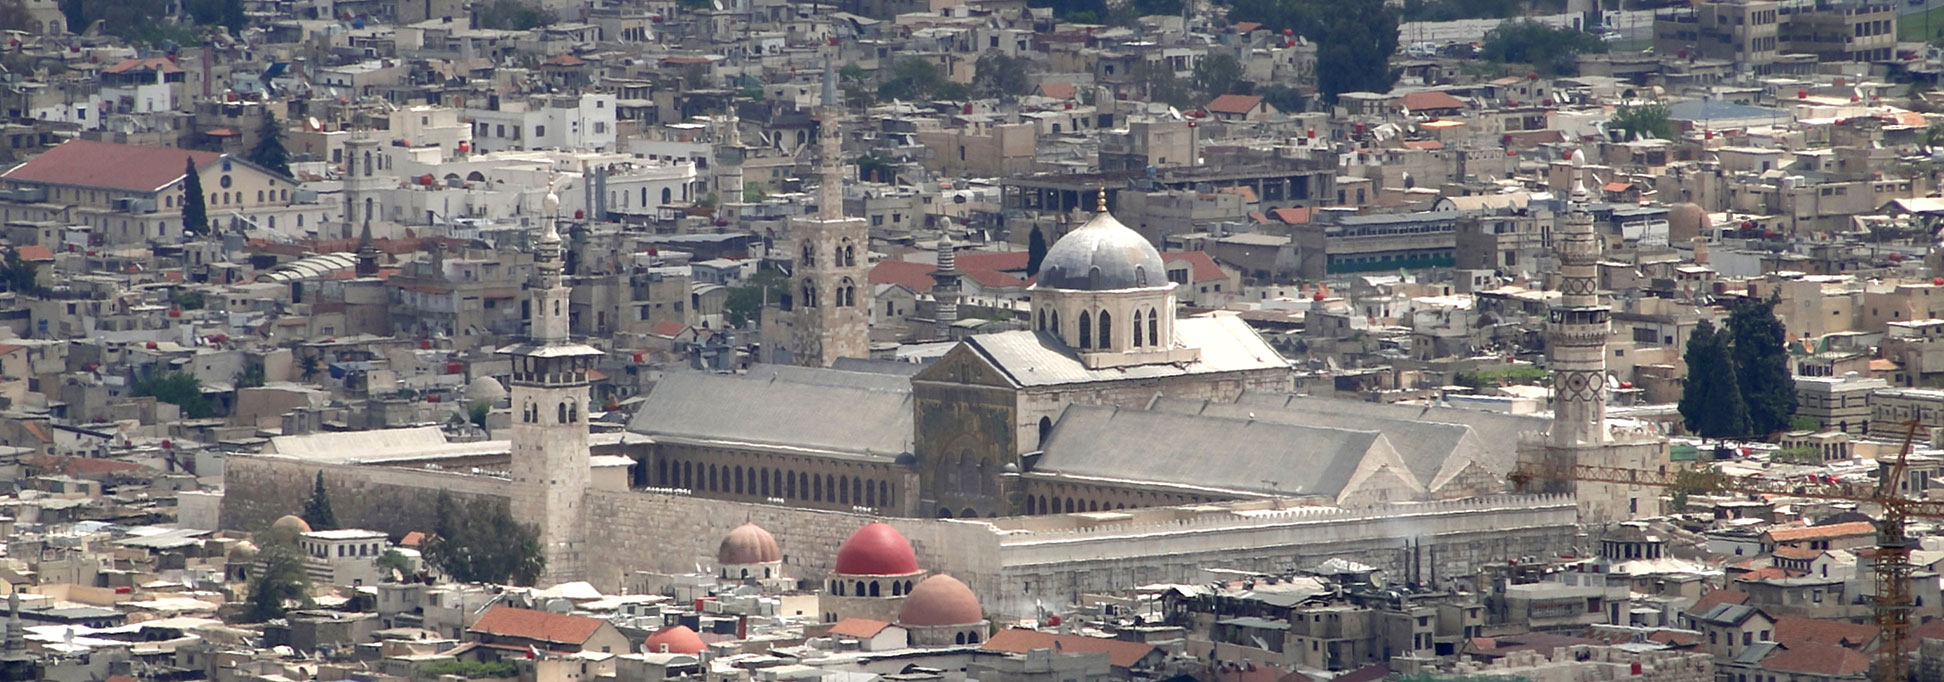 The Umayyad Mosque in the Old City of Damascus